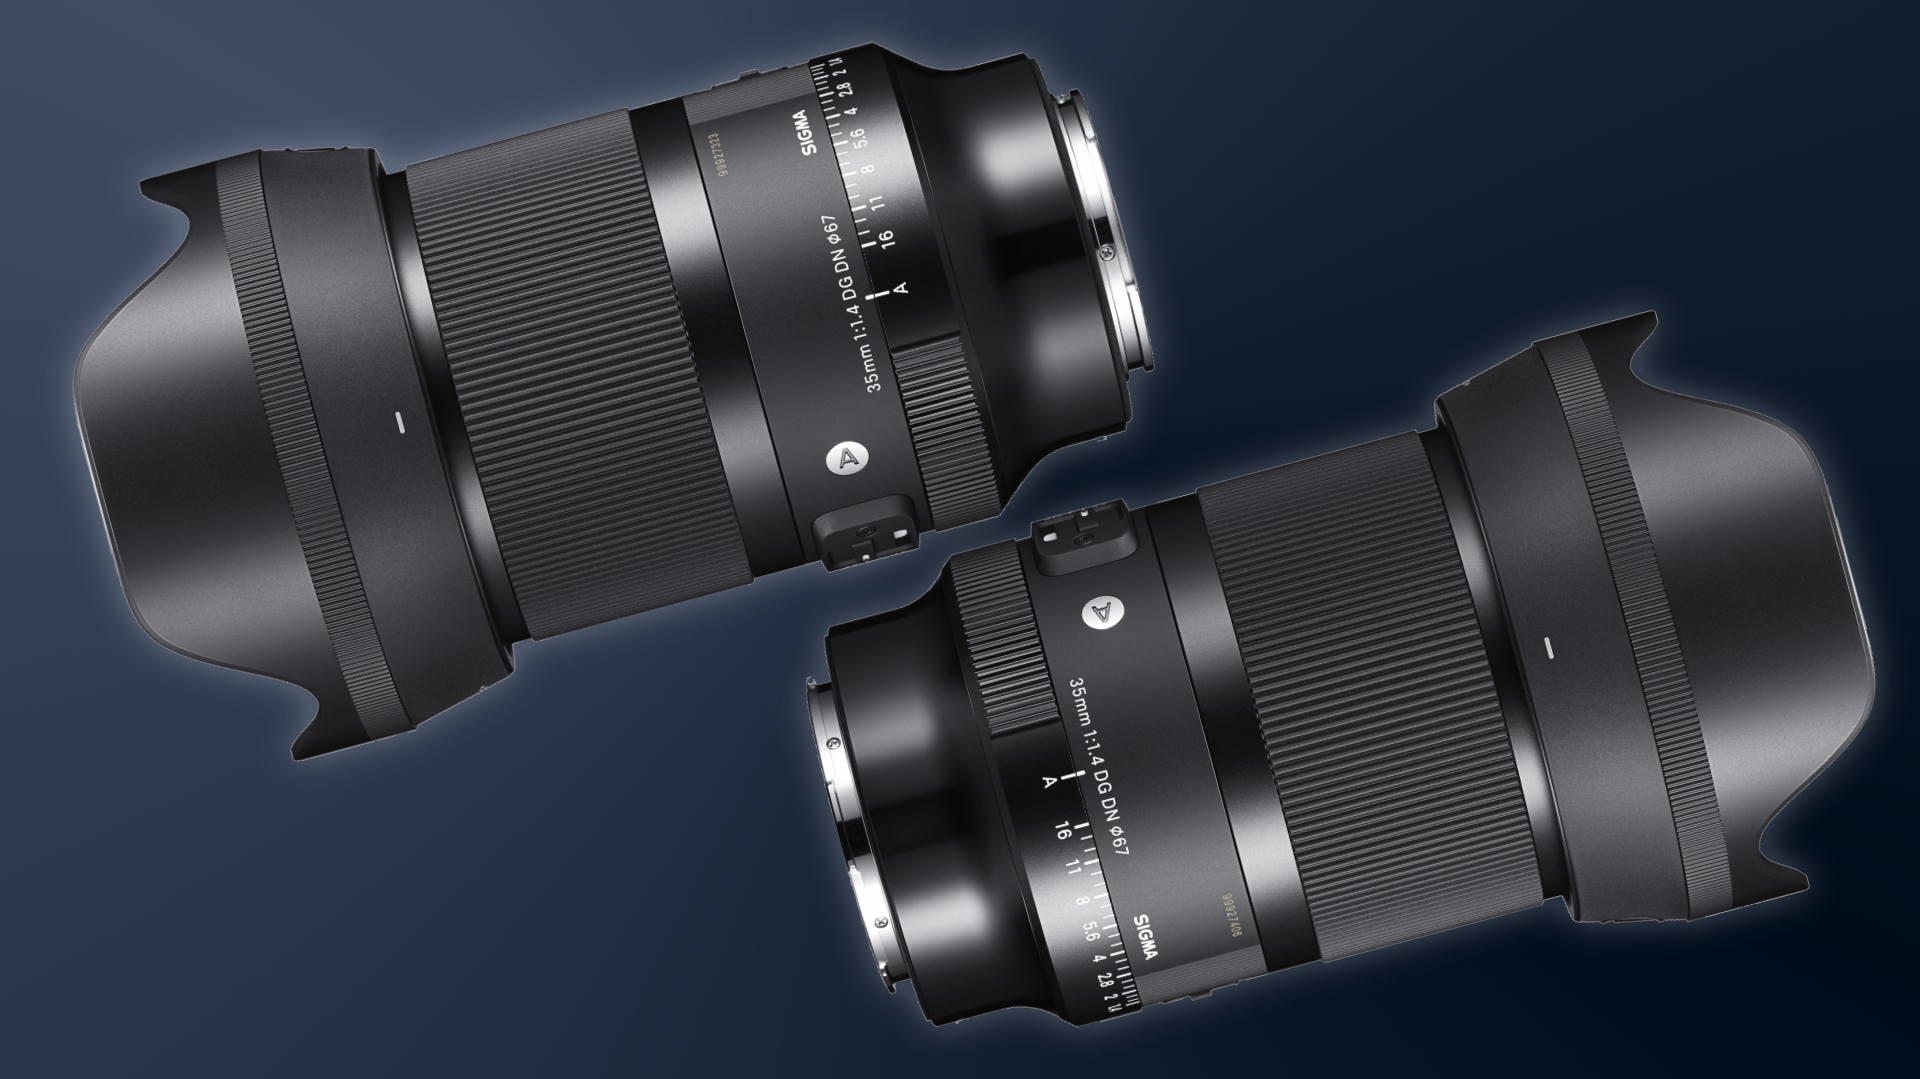 SIGMA 35mm F1.4 DG DN Art Introduced – A Classic Lens Revisited 